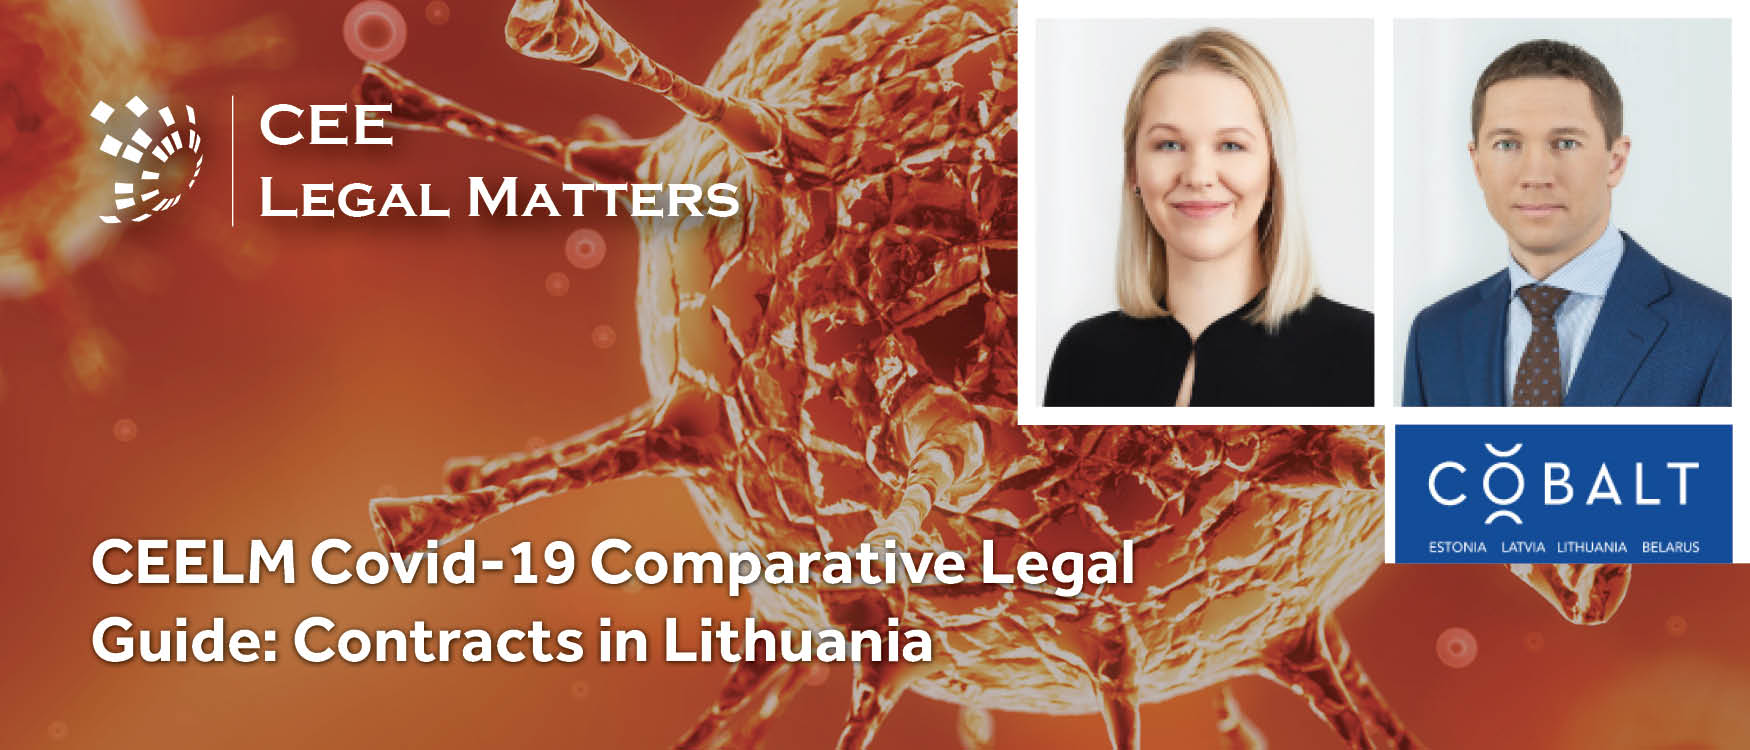 CEELM Covid-19 Comparative Legal Guide: Contracts in Lithuania